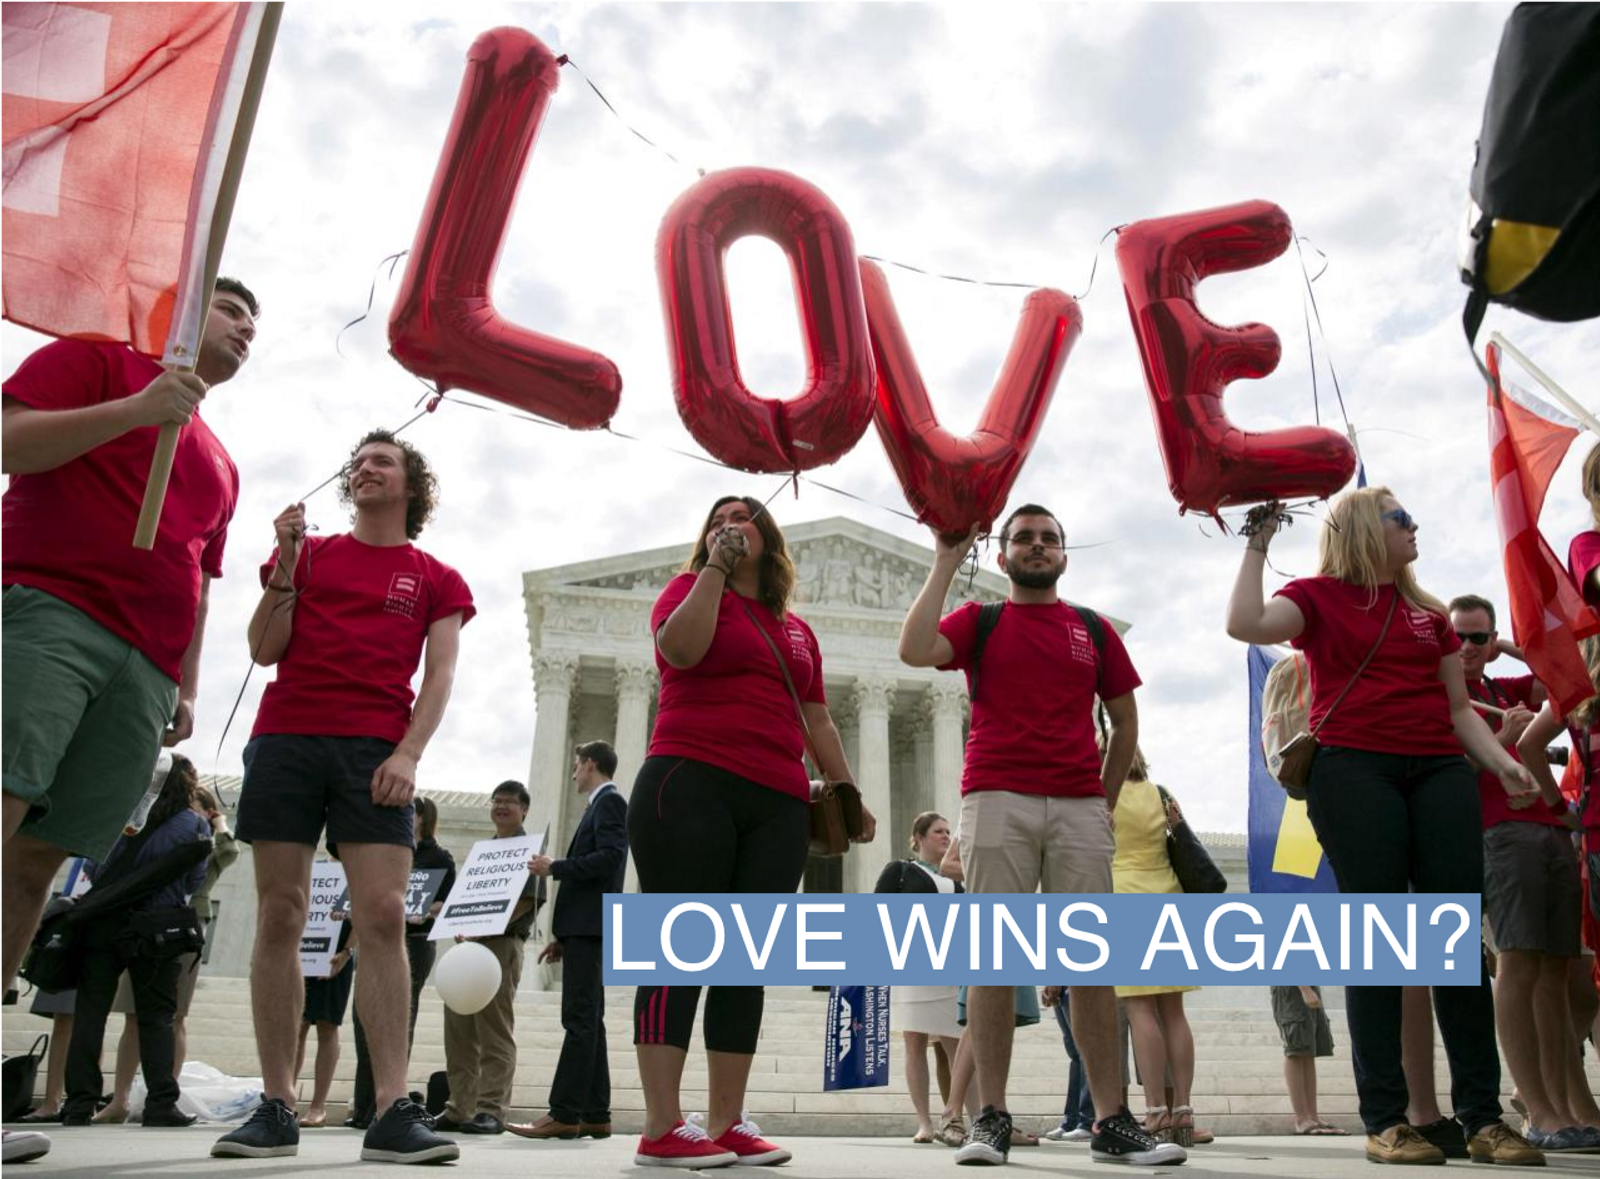 Supporters of gay marriage rally in front of the Supreme Court. June 25, 2015.